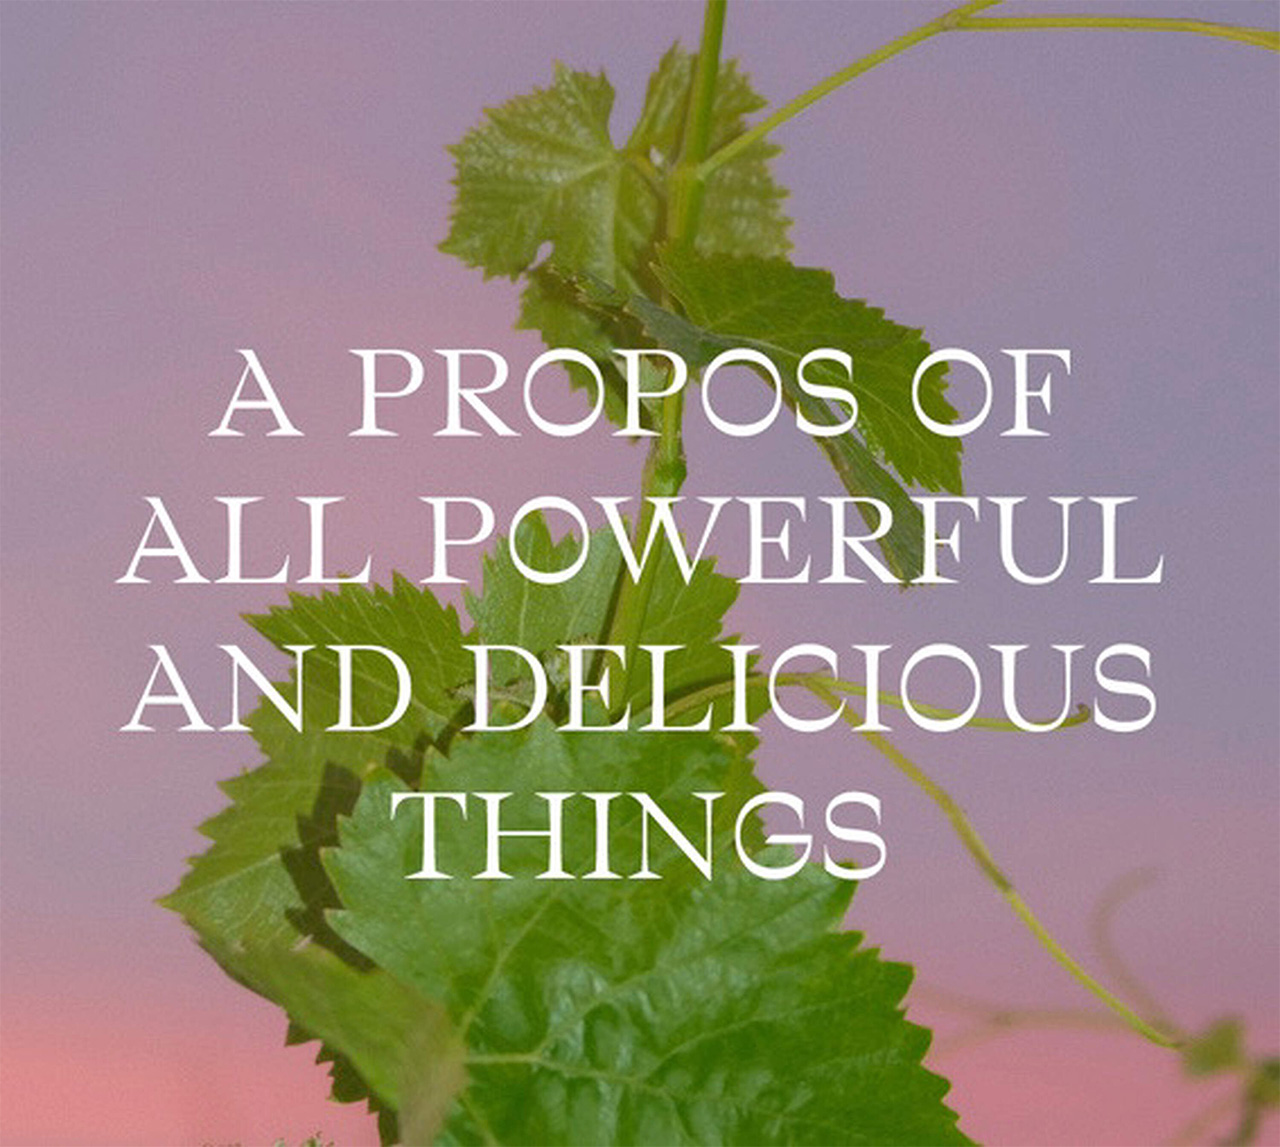 A propos of all powerful and delicious things